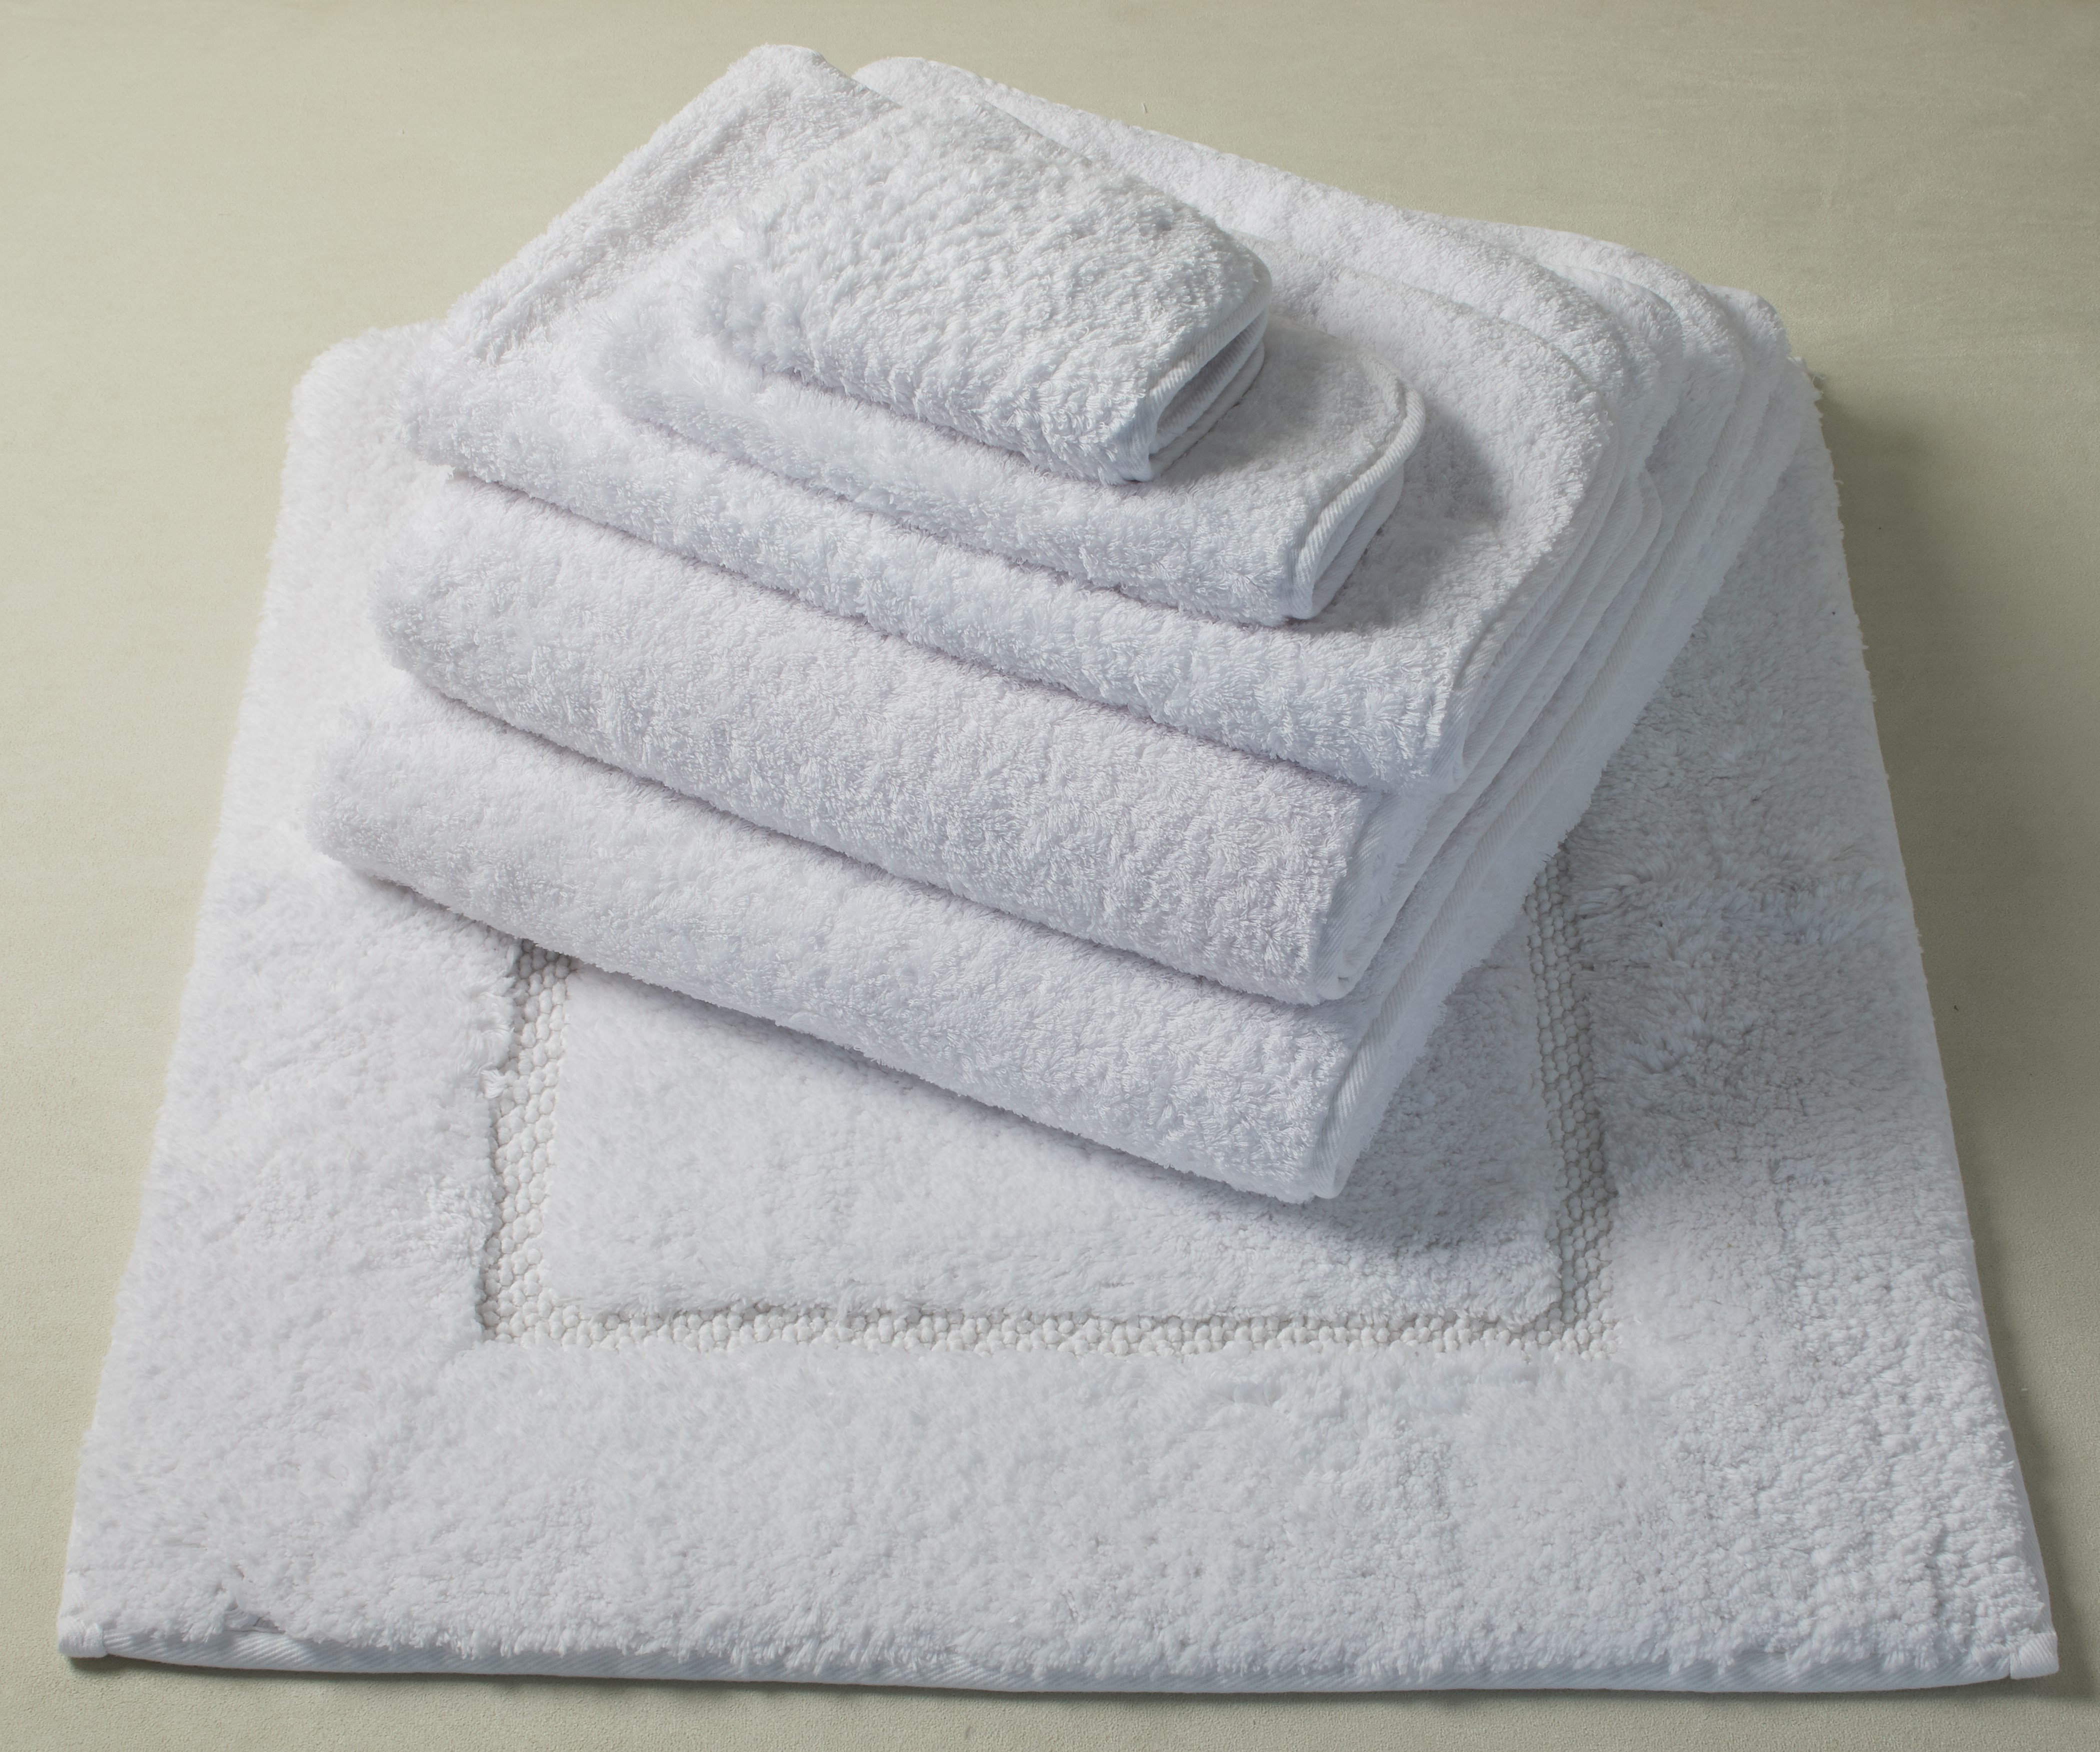 How to Keep Your Towels Fluffy - Braun Linen Services